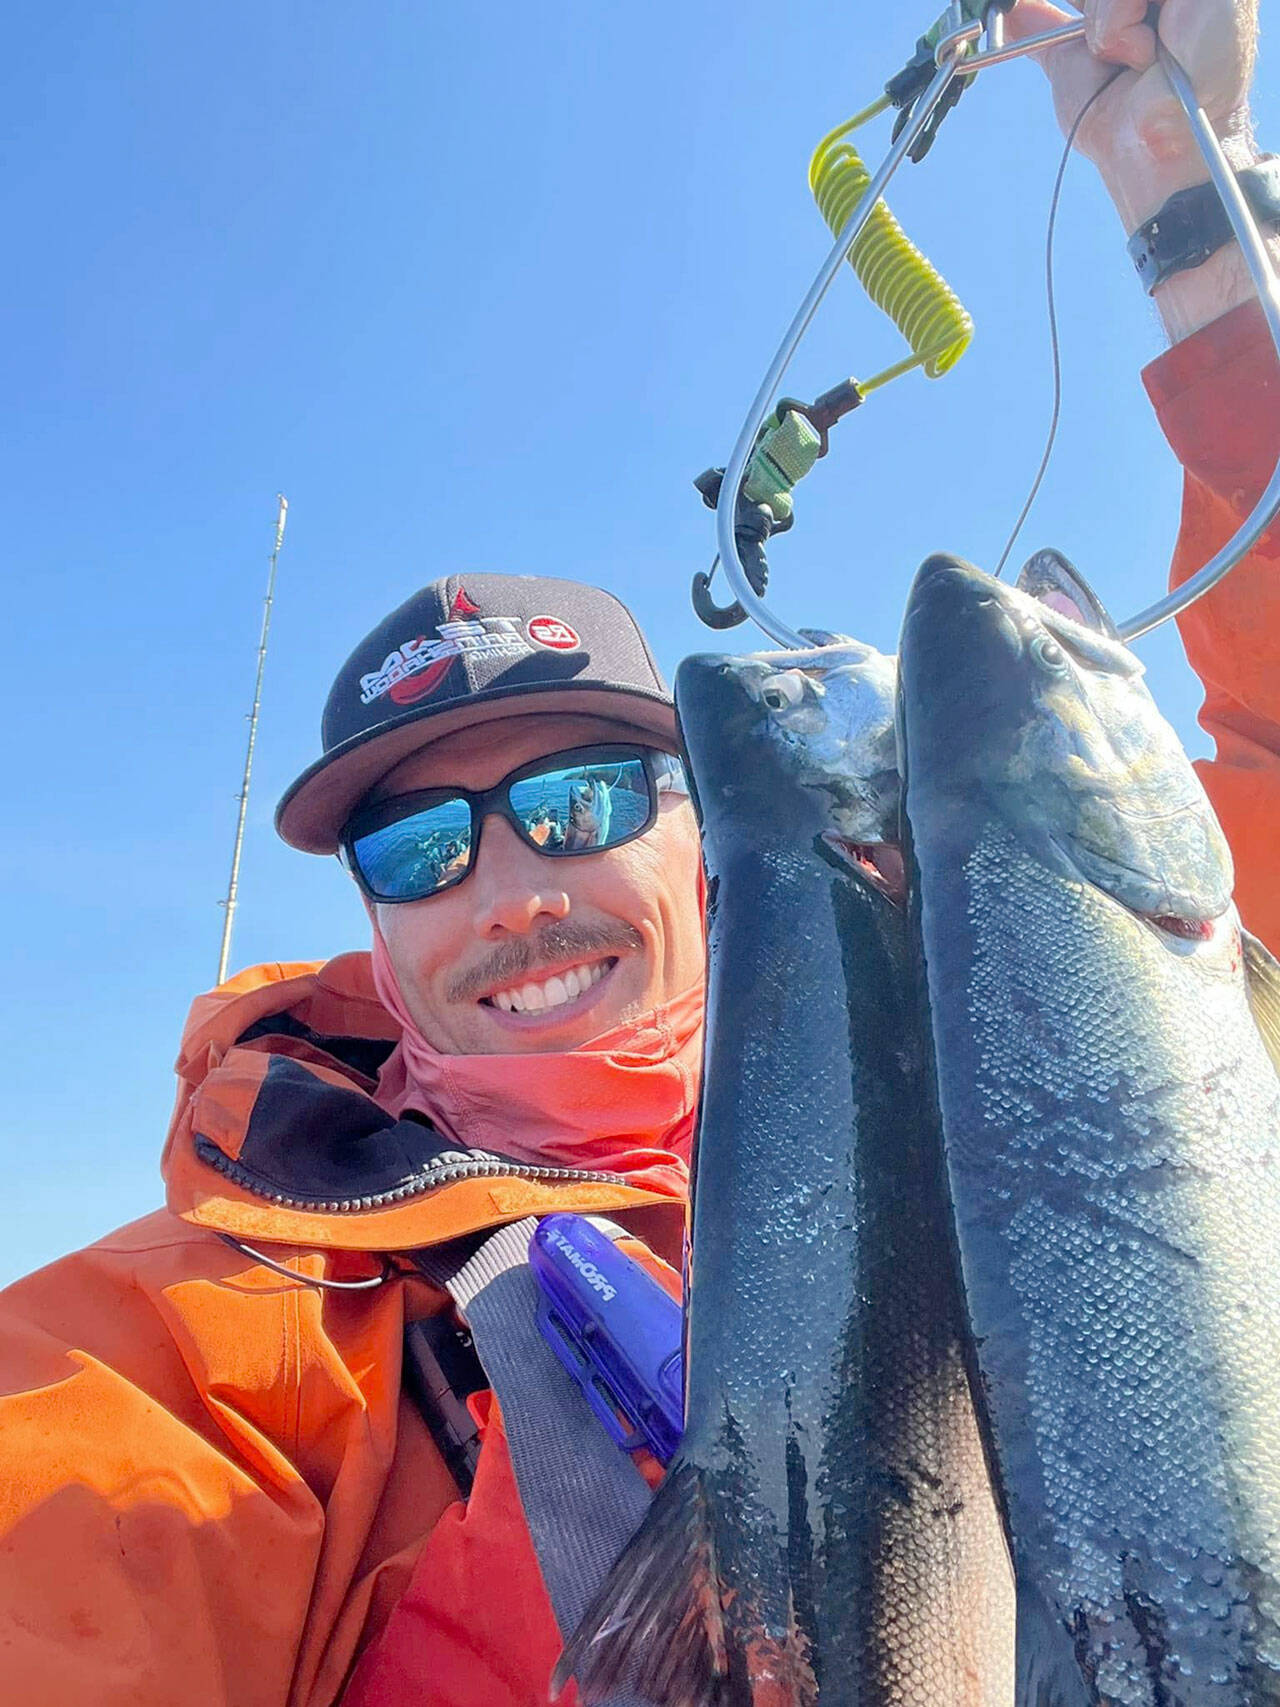 Sequim’s Kyle Kautzman enjoyed an excellent day of fishing near Salt Creek on his Old Town kayak. Kautzman caught a pair of good-sized hatchery coho after spending time releasing a number of kings and lingcod.